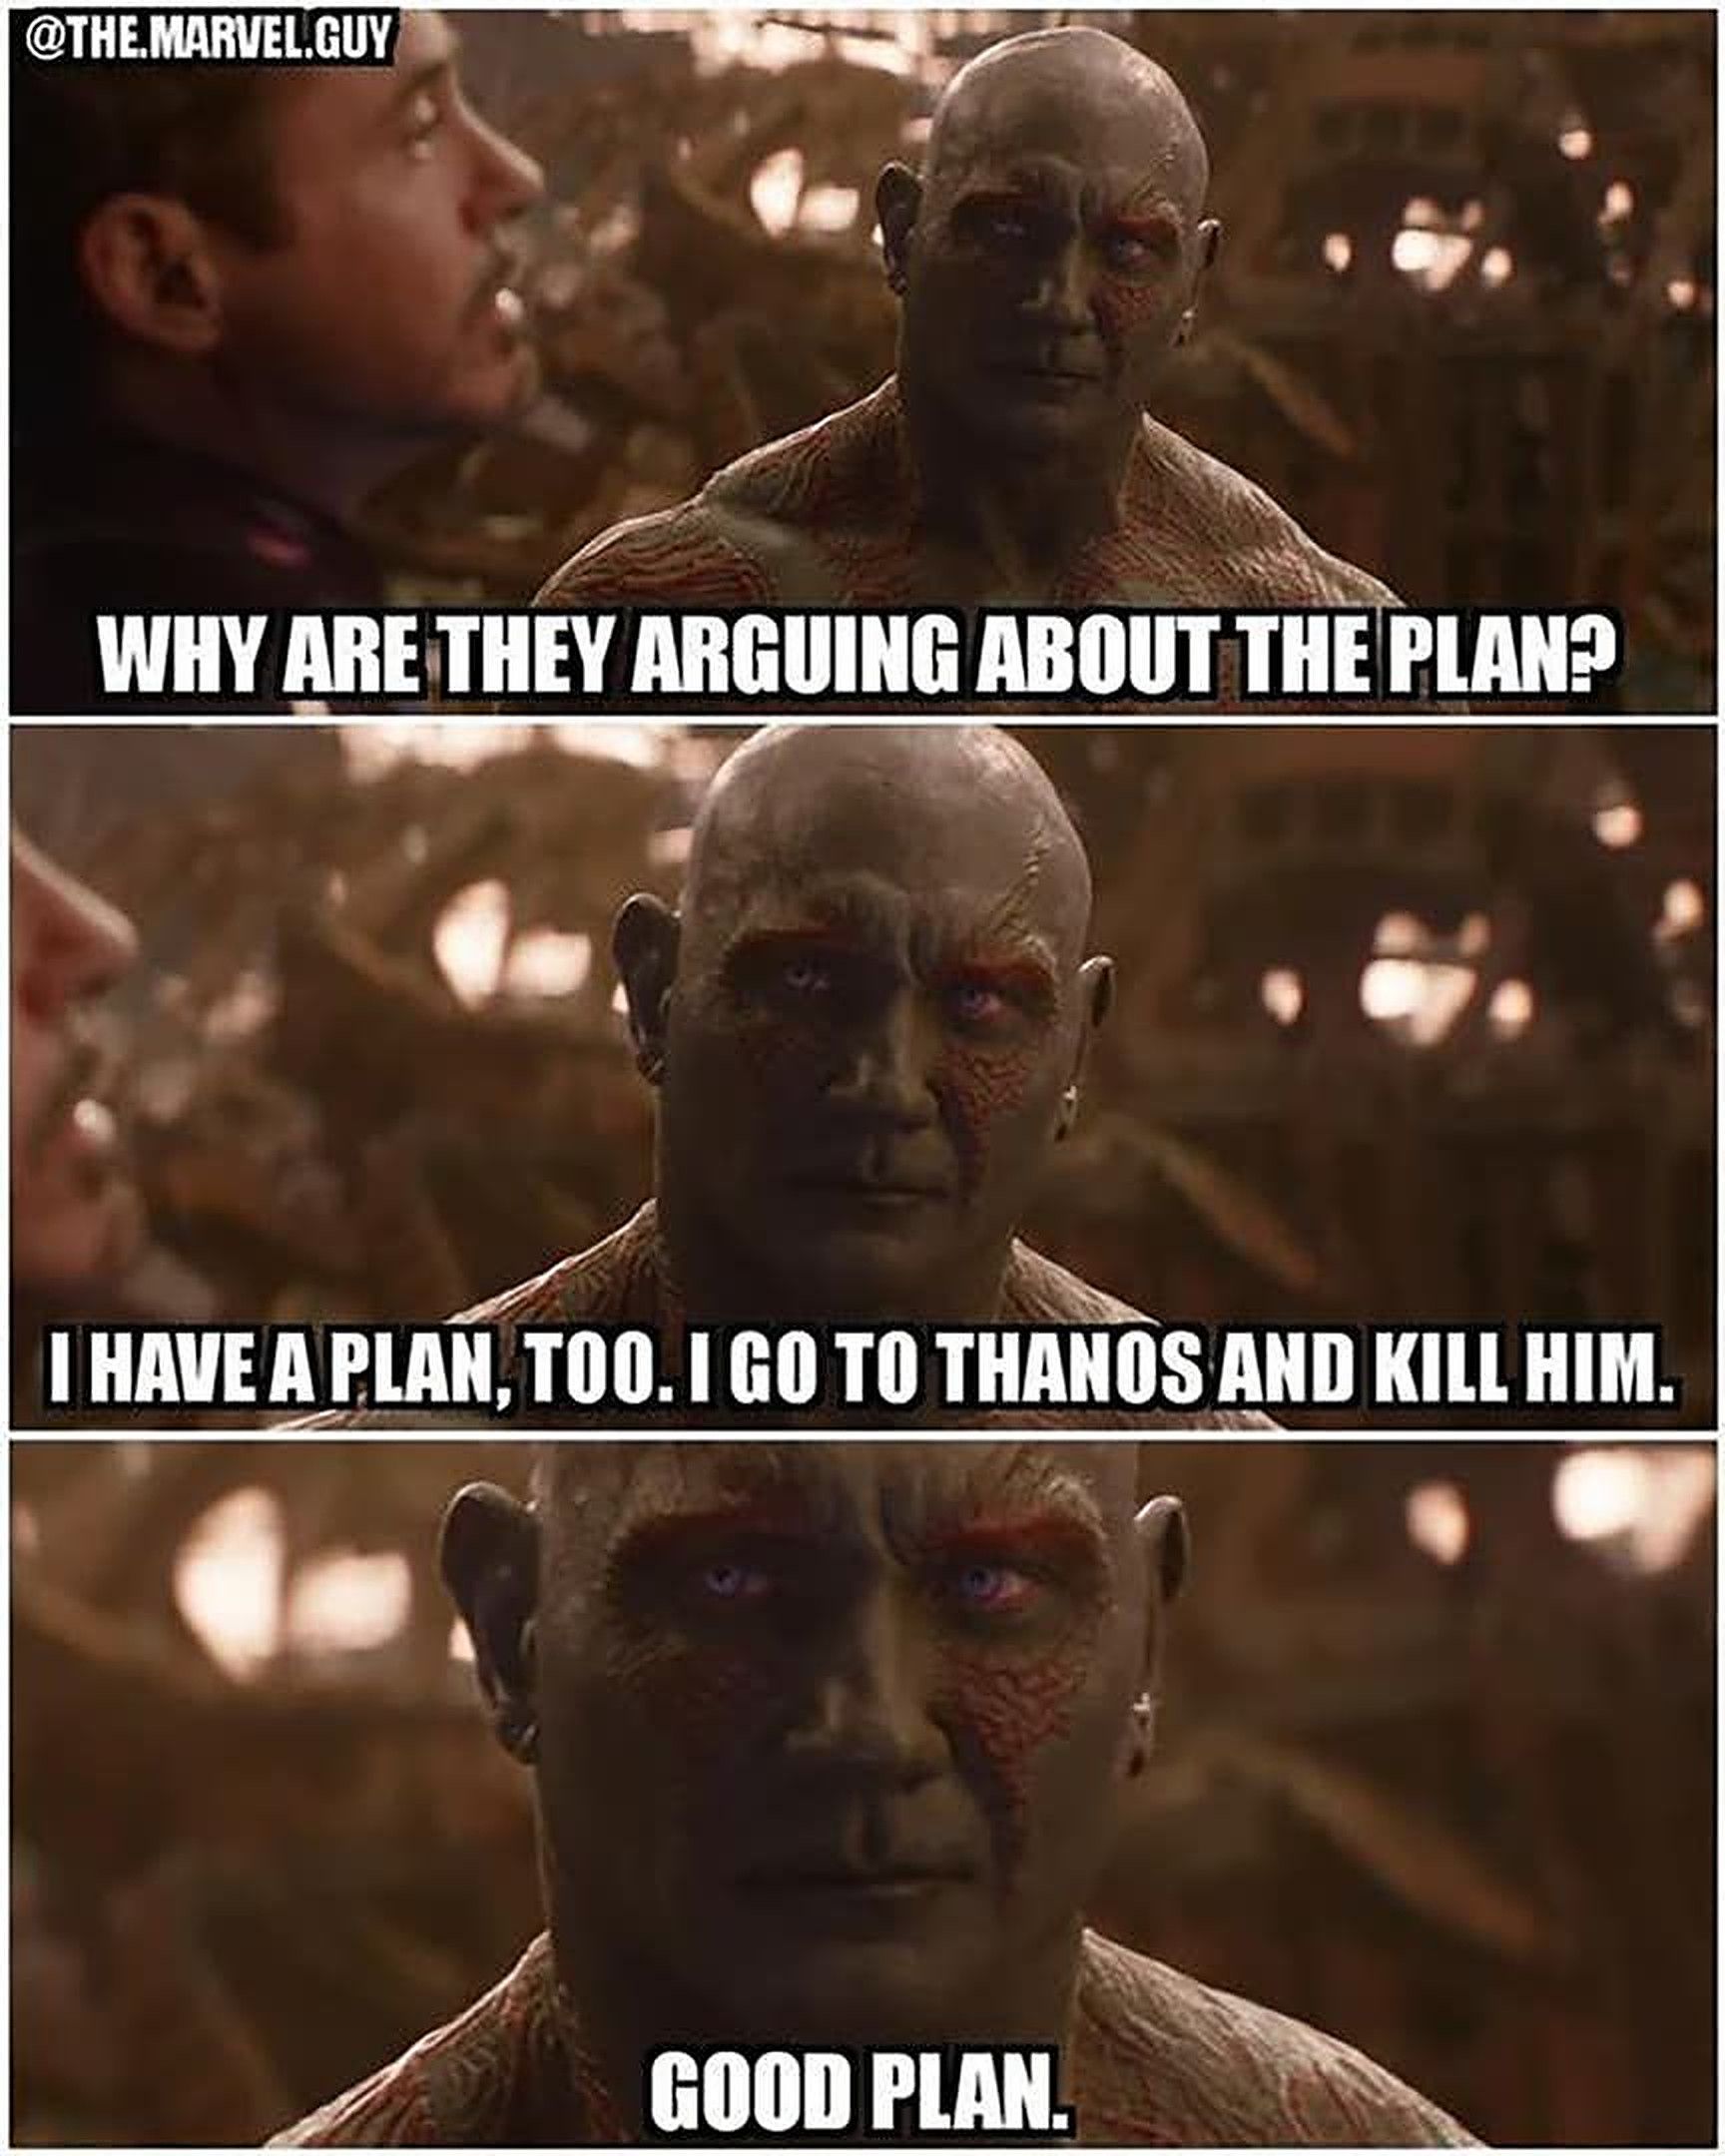 Drax has a plan to kill Thanos which he presents to Iron Man